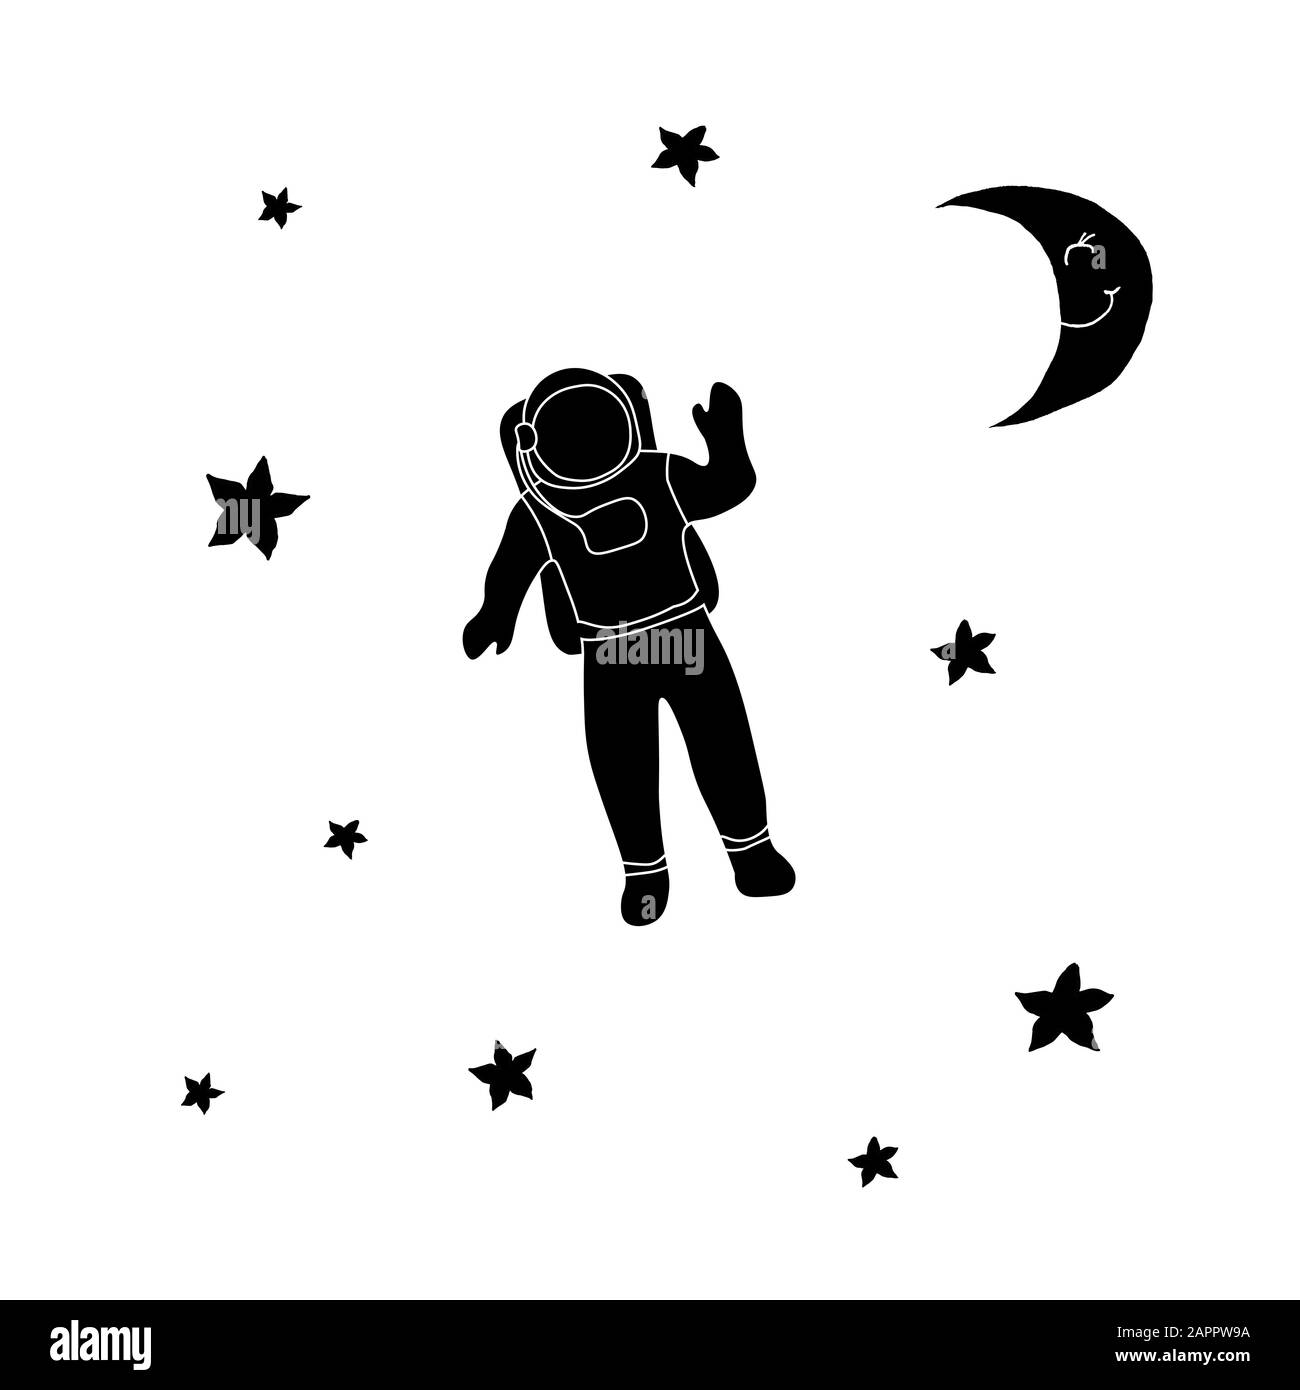 Cosmonaut astronaut, moon and stars. Black outline on white background. Picture can be used in greeting cards, posters, flyers, banners, logo, further design etc. Vector illustration. EPS10 Stock Vector